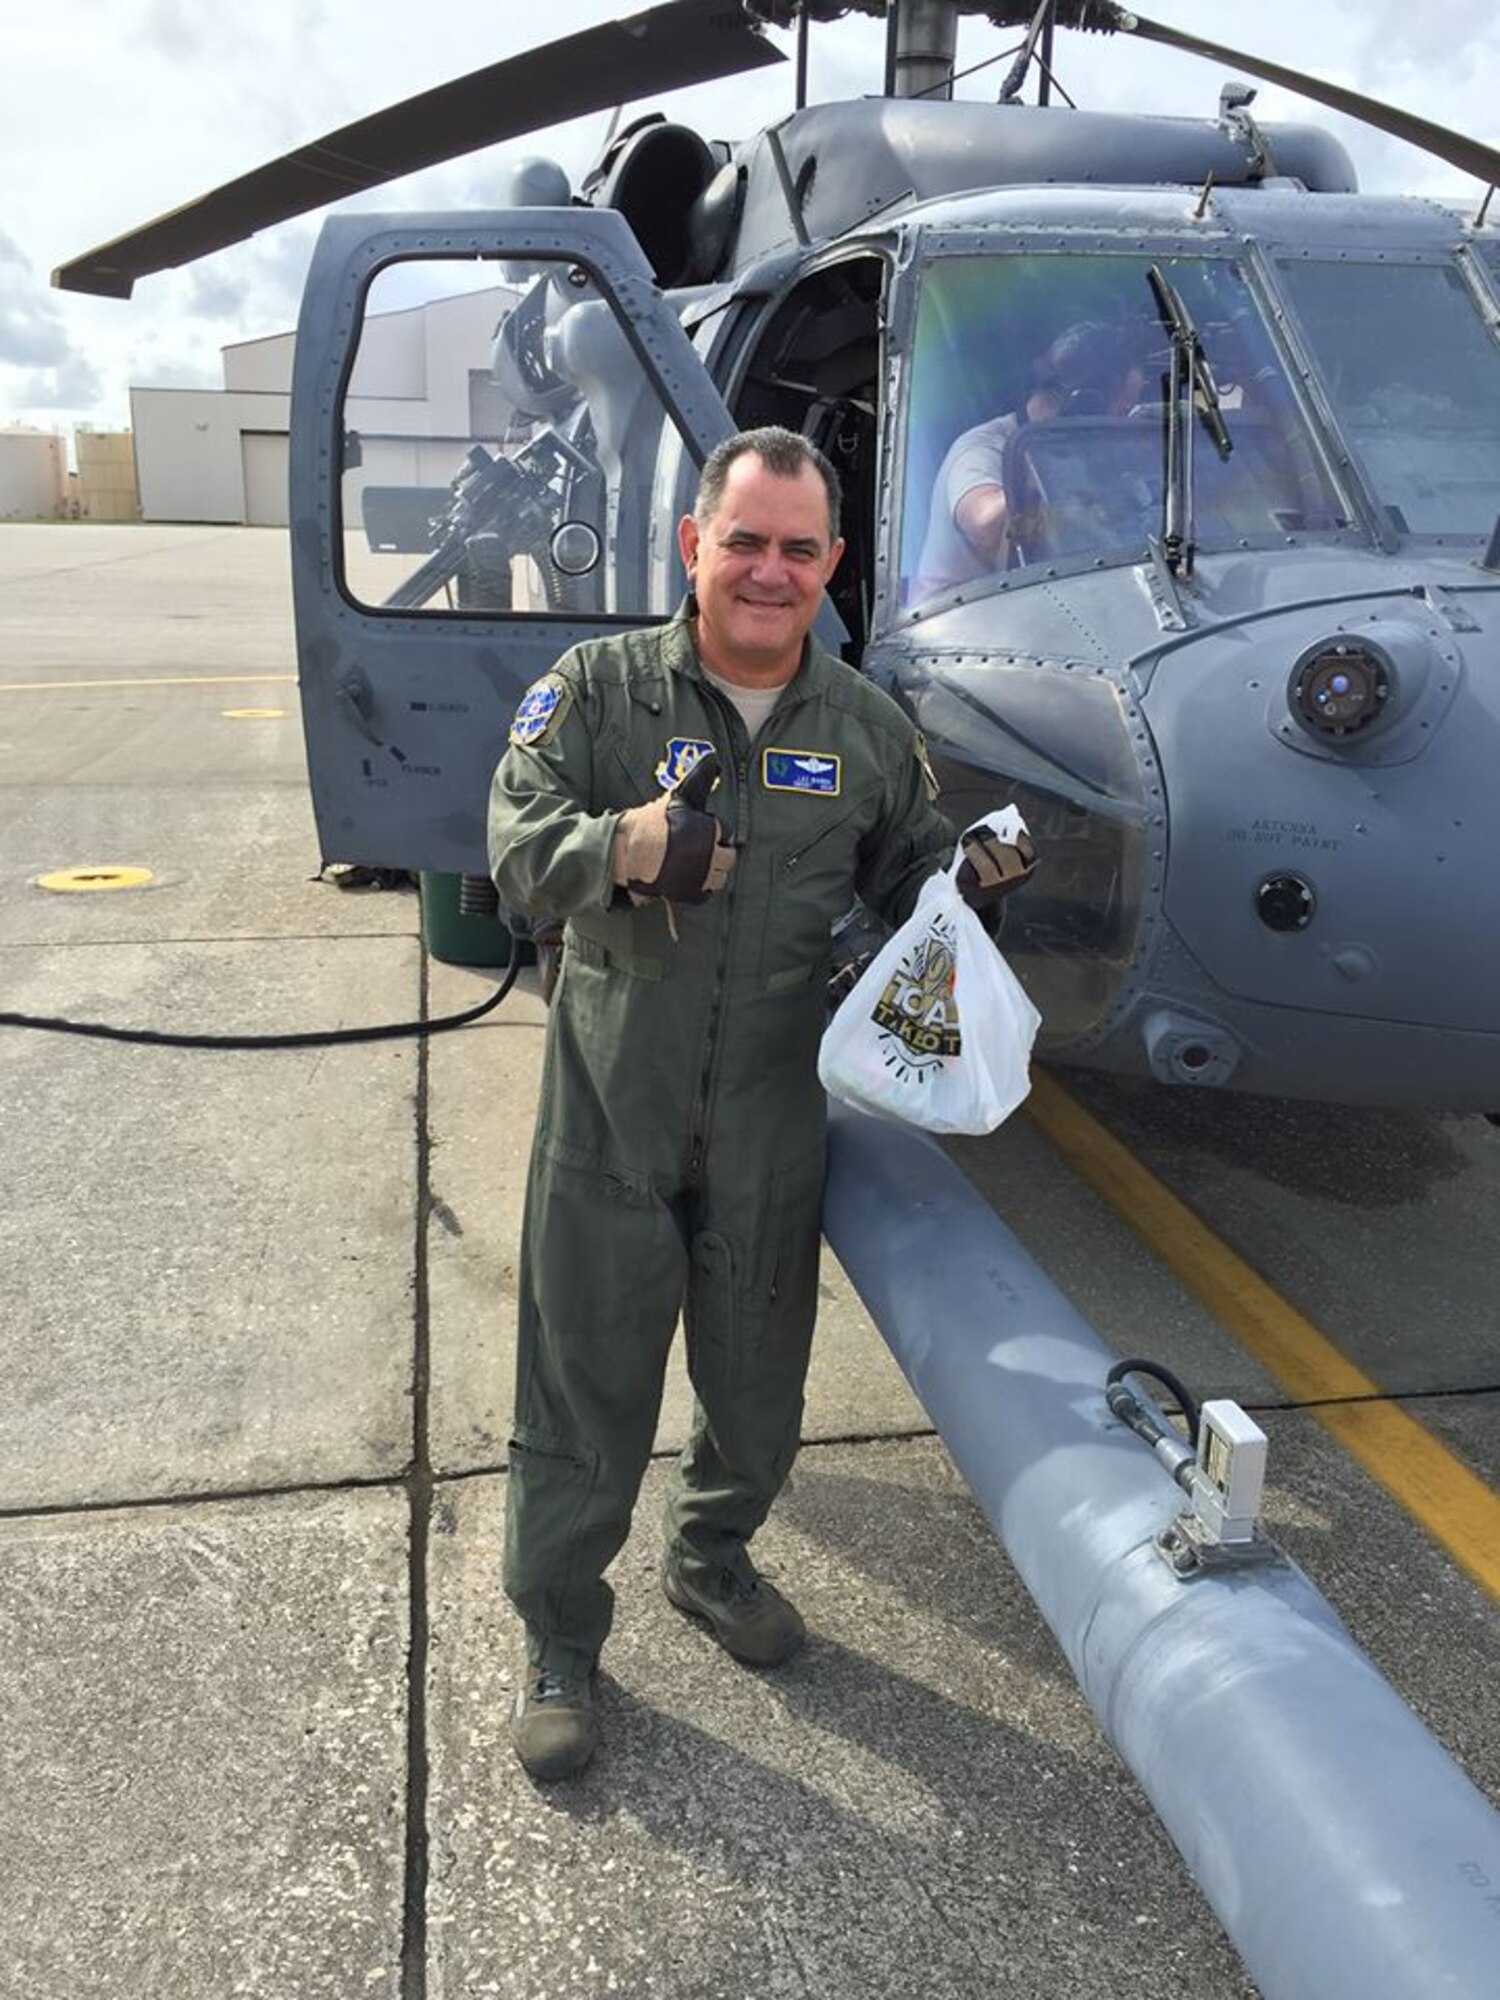 Chief Master Sgt. Lazaro Ibarra, 301st Rescue Squadron special mission aviator here, gives a thumbs up and as he prepares to board an HH-60G Pave Hawk helicopter with his last official box lunch. Ibarra’s fini-flight here, Dec. 2 marks end of the chief’s 35-year career. (Courtesy photo)
